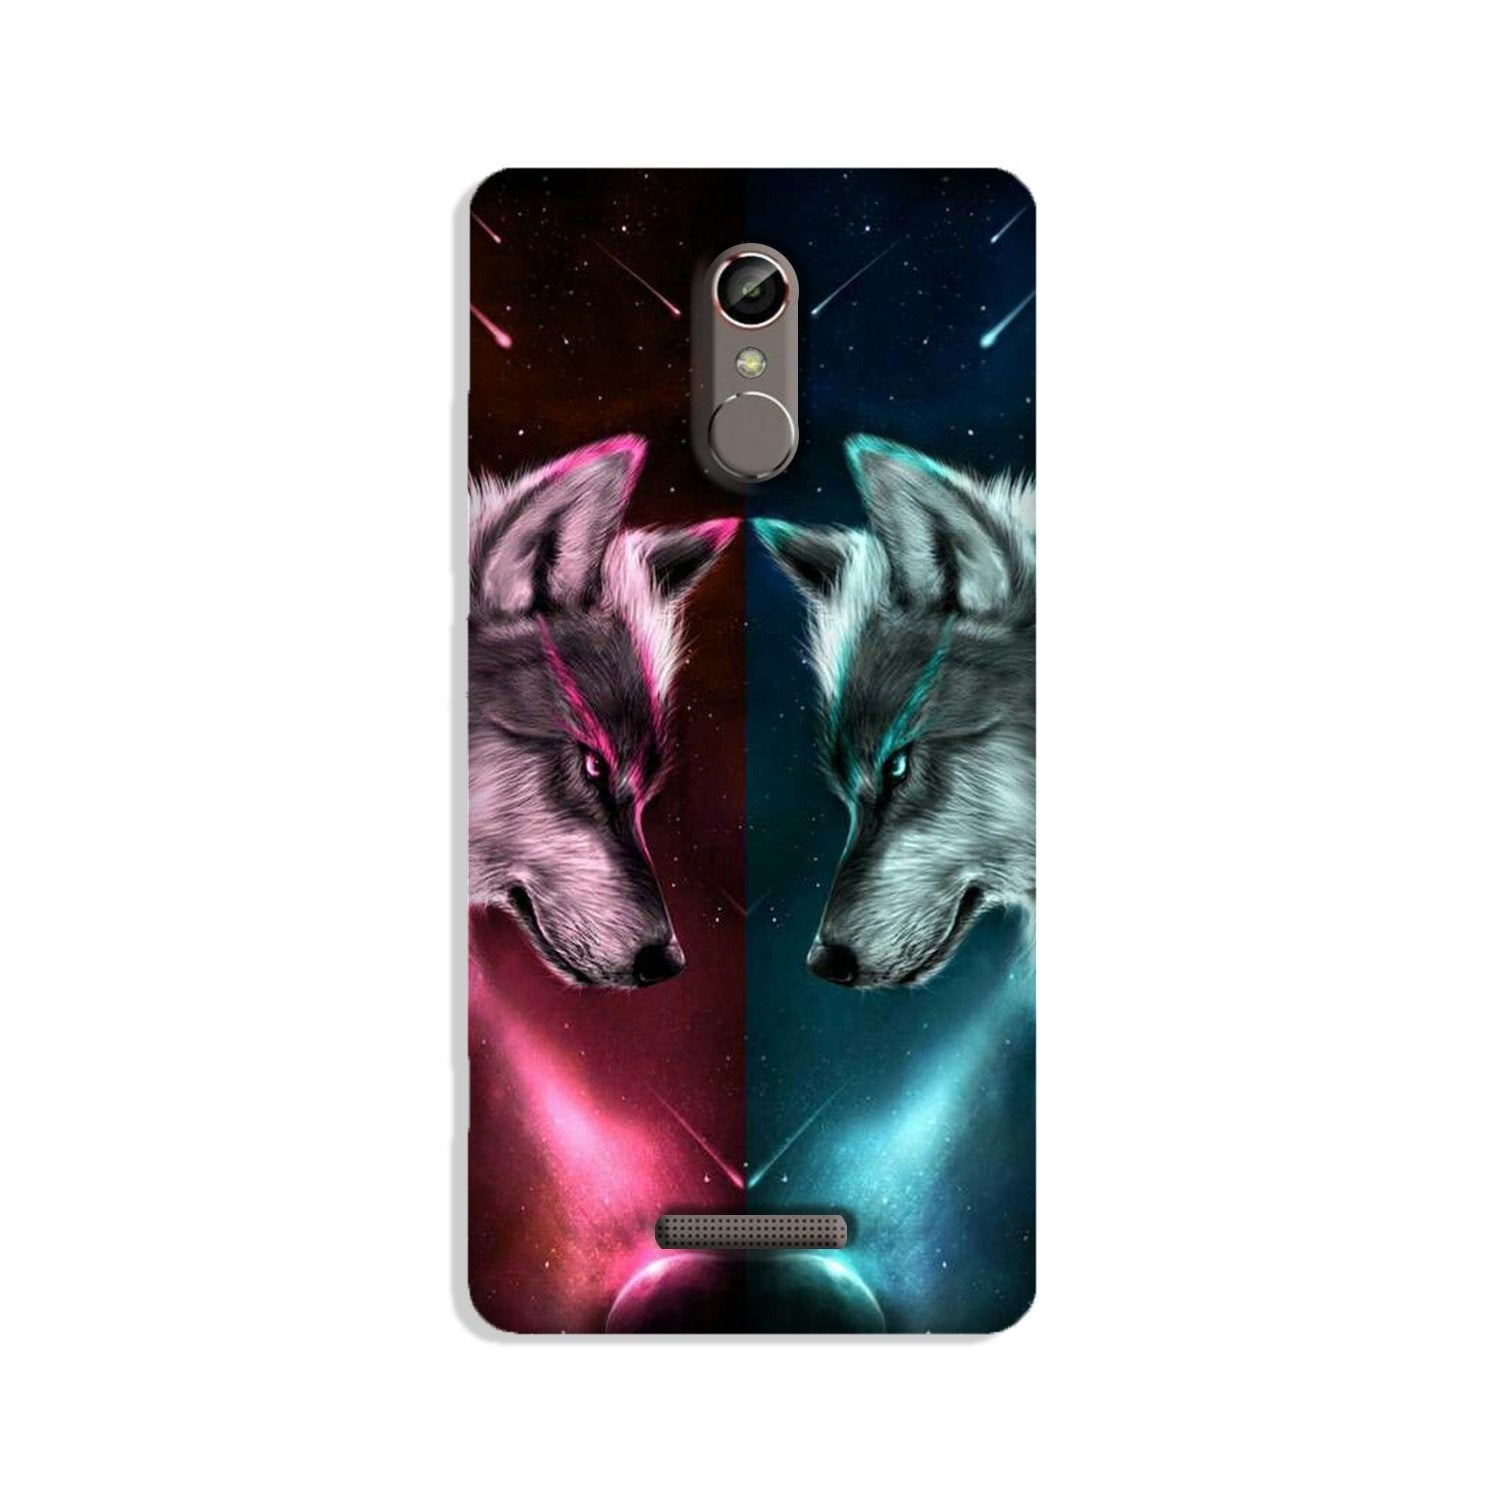 Wolf fight Case for Gionee S6s (Design No. 221)